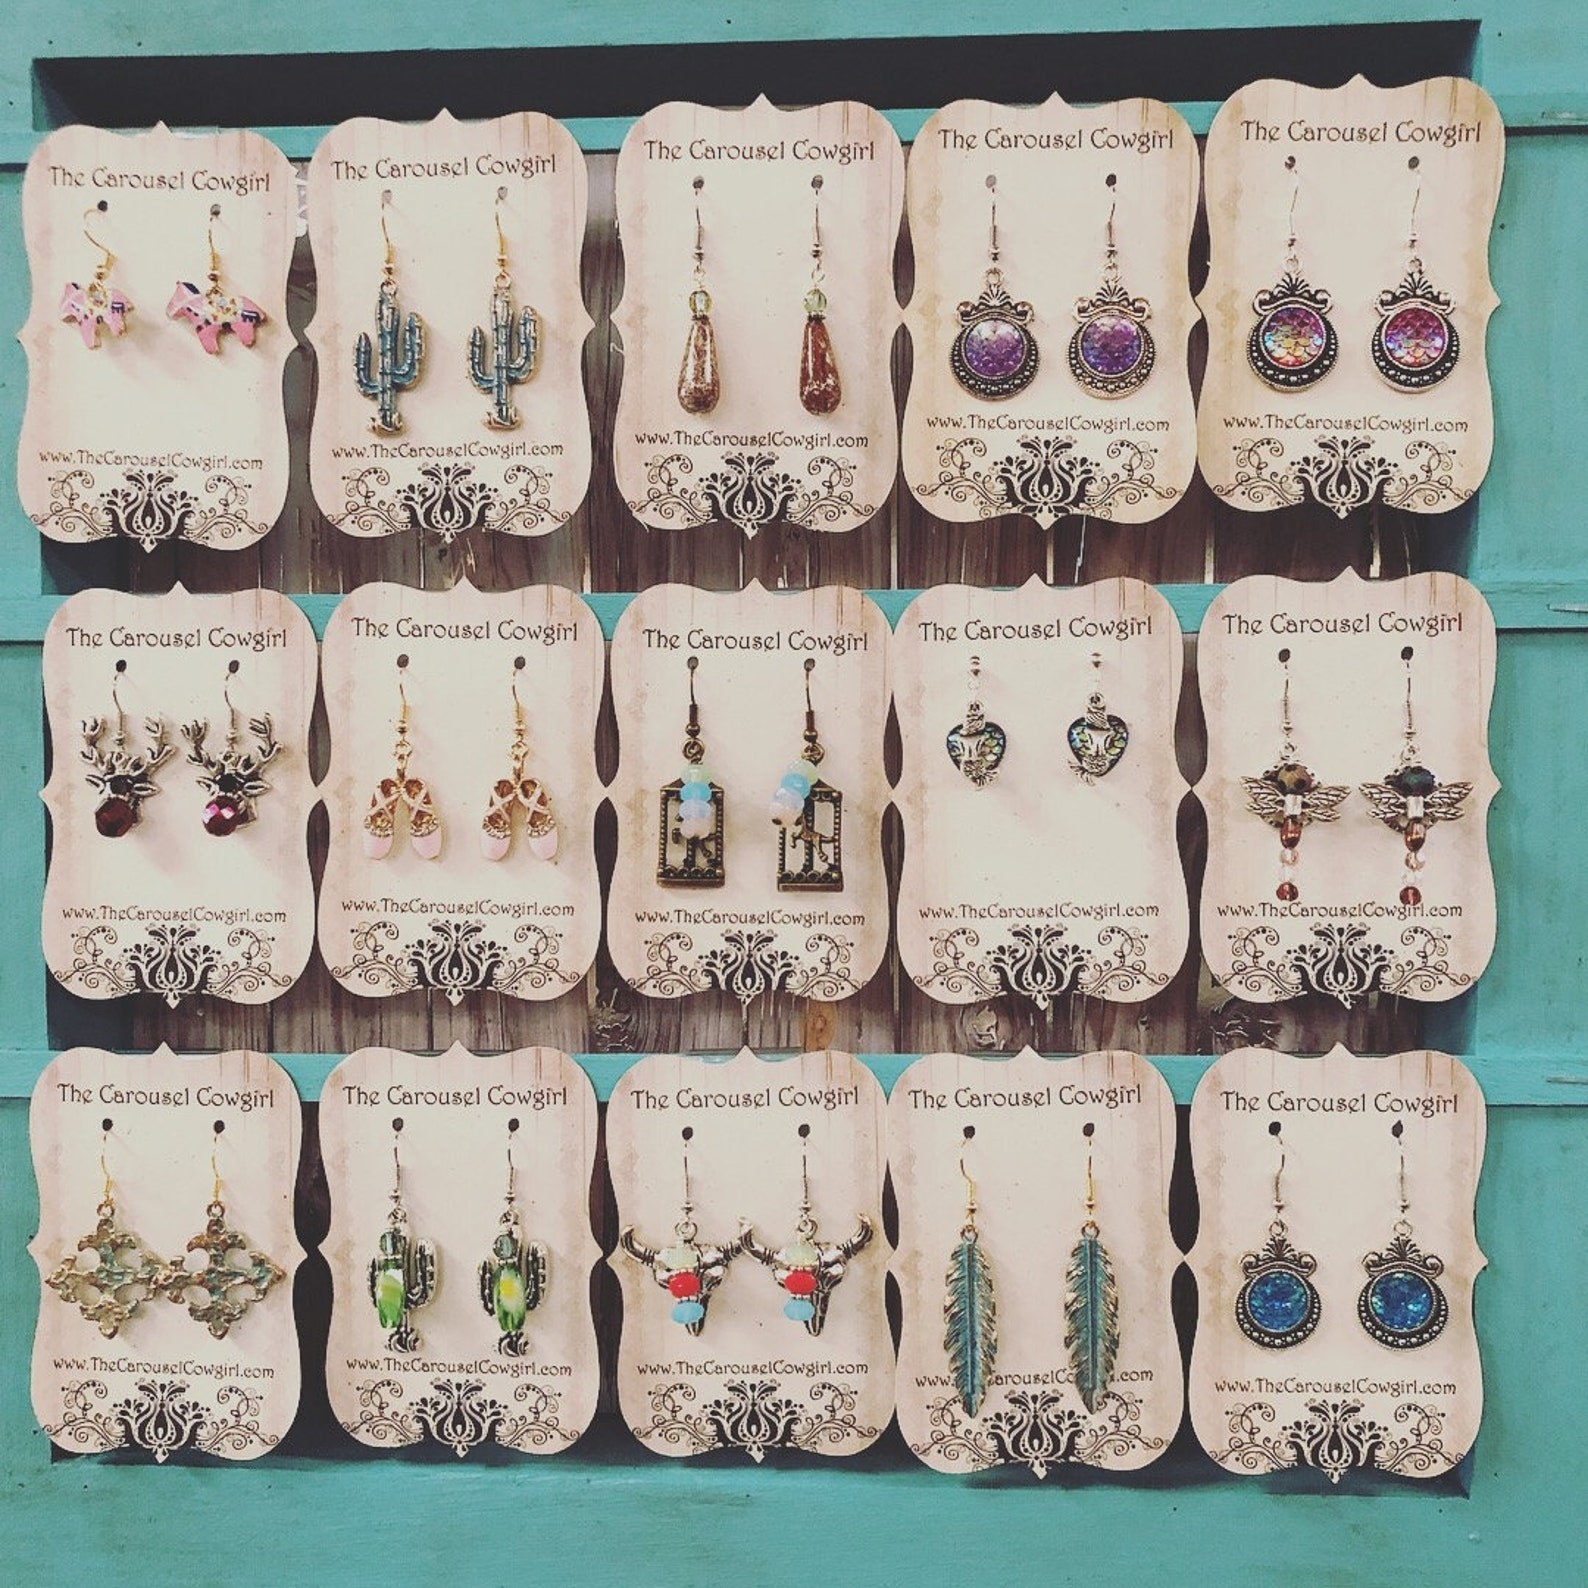 Fifteen assorted pairs of earrings hanging on an earring holder